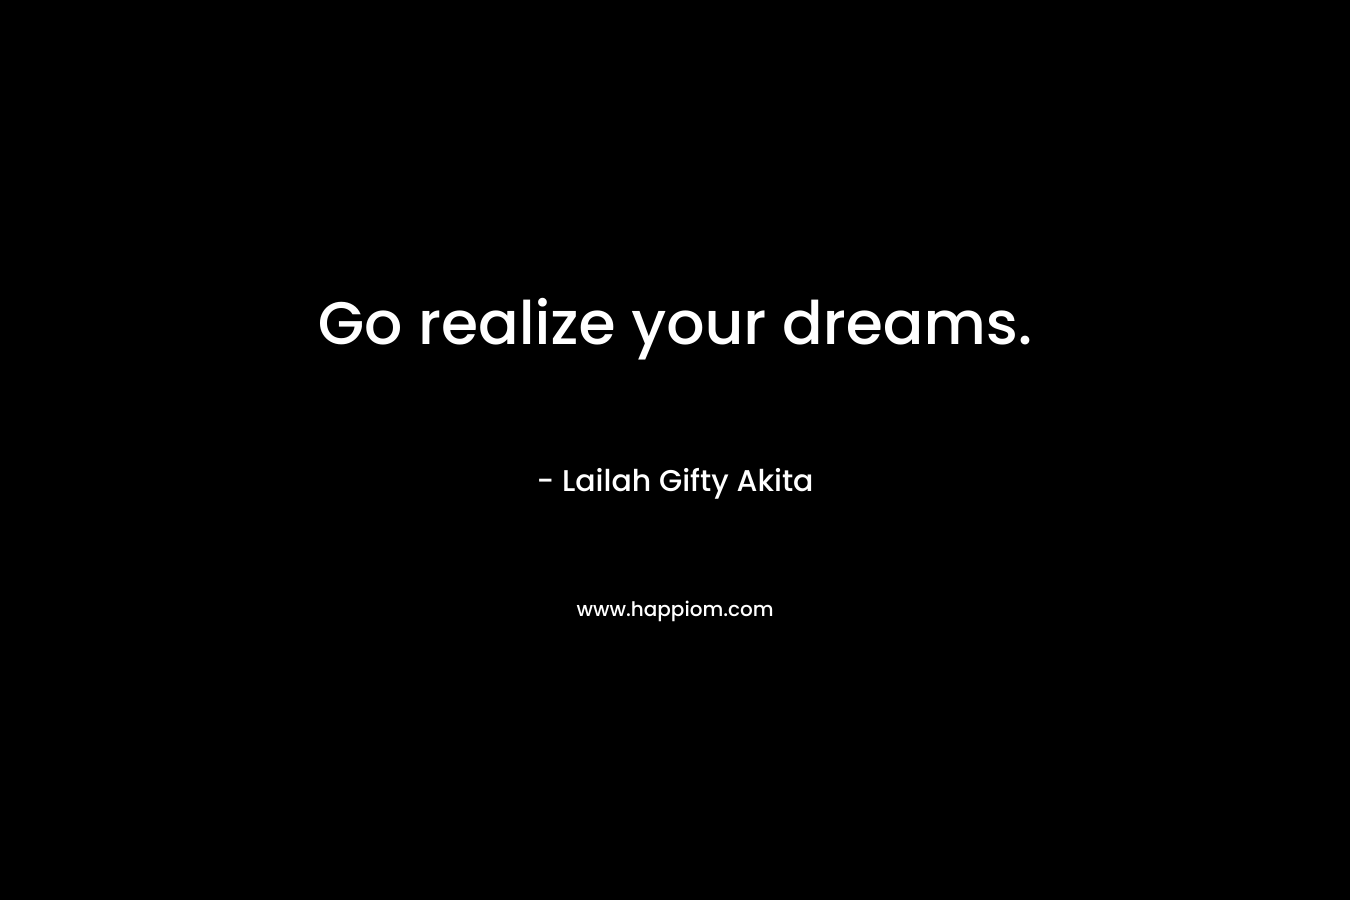 Go realize your dreams.